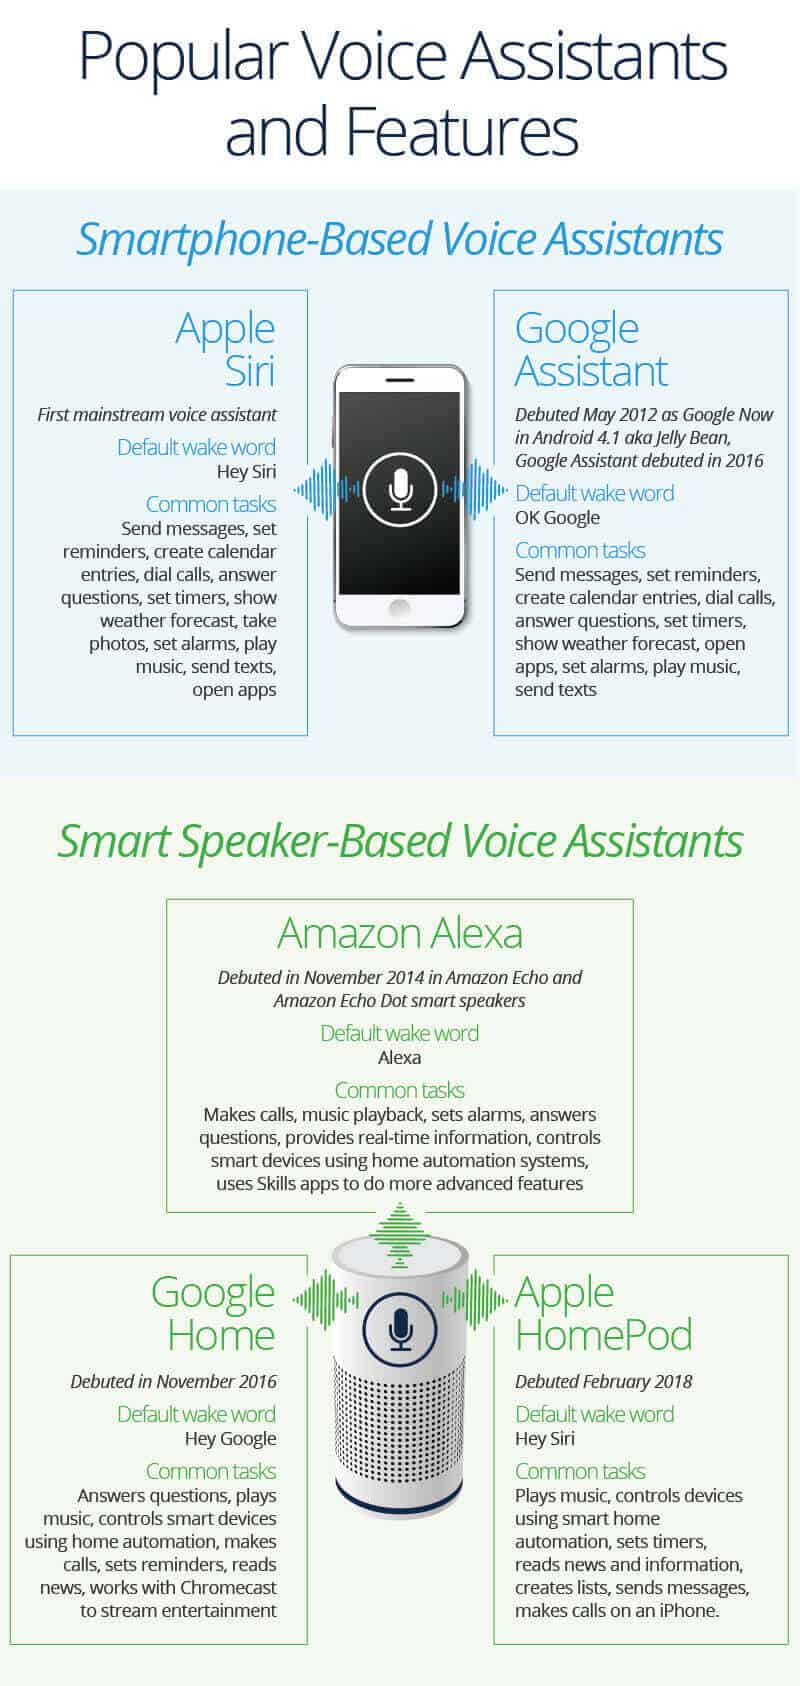 5 ways in which voice assistants will change your life - Steven